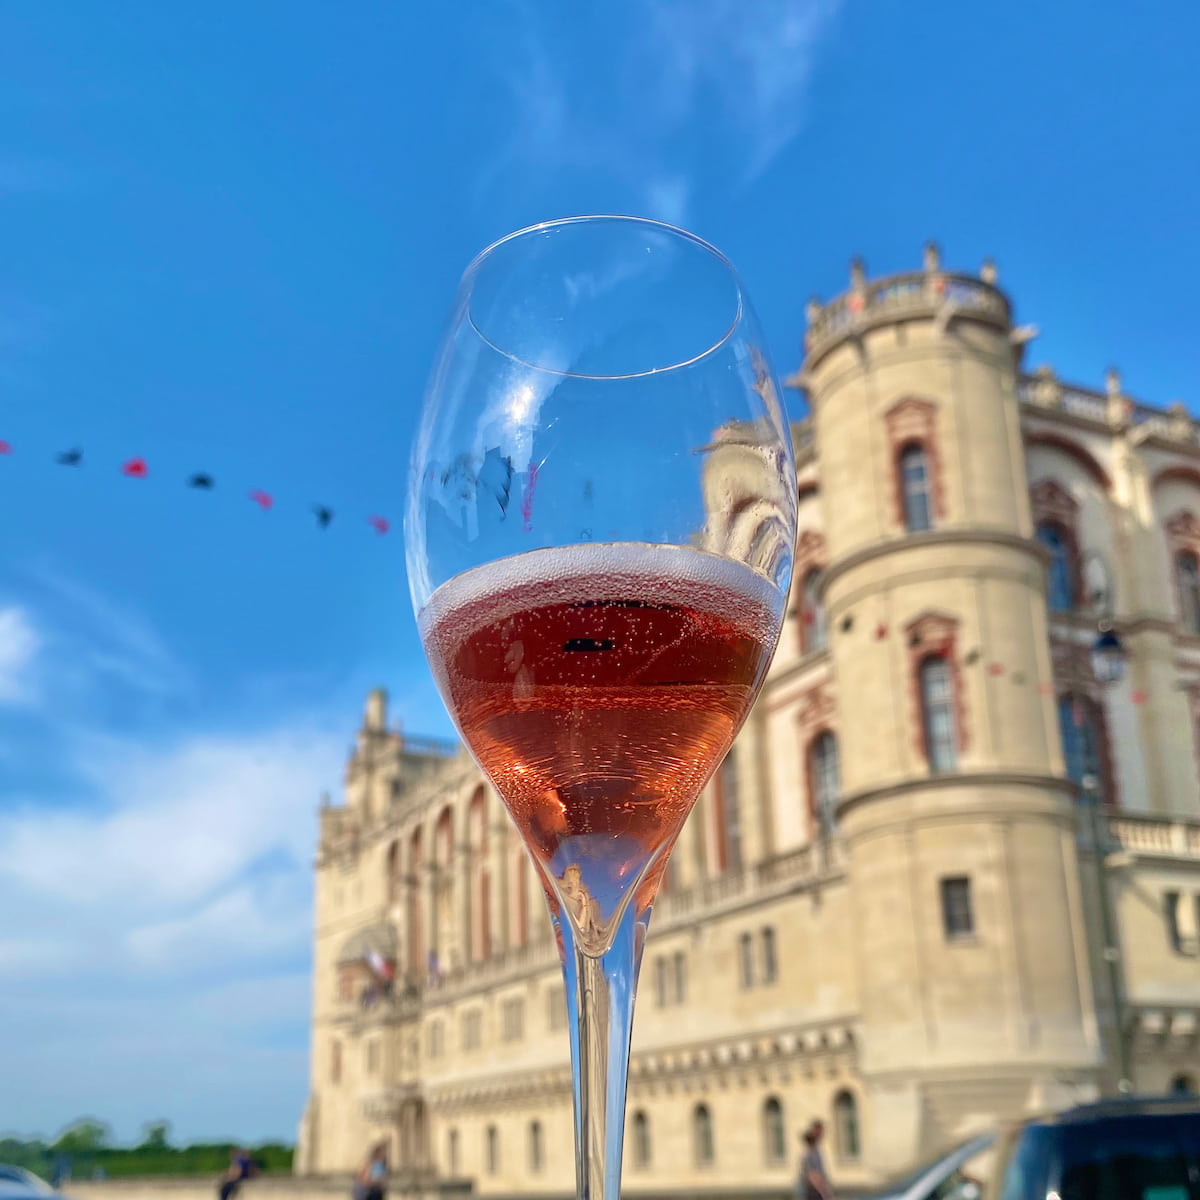 Kir Royal cocktail in front of a French chateau